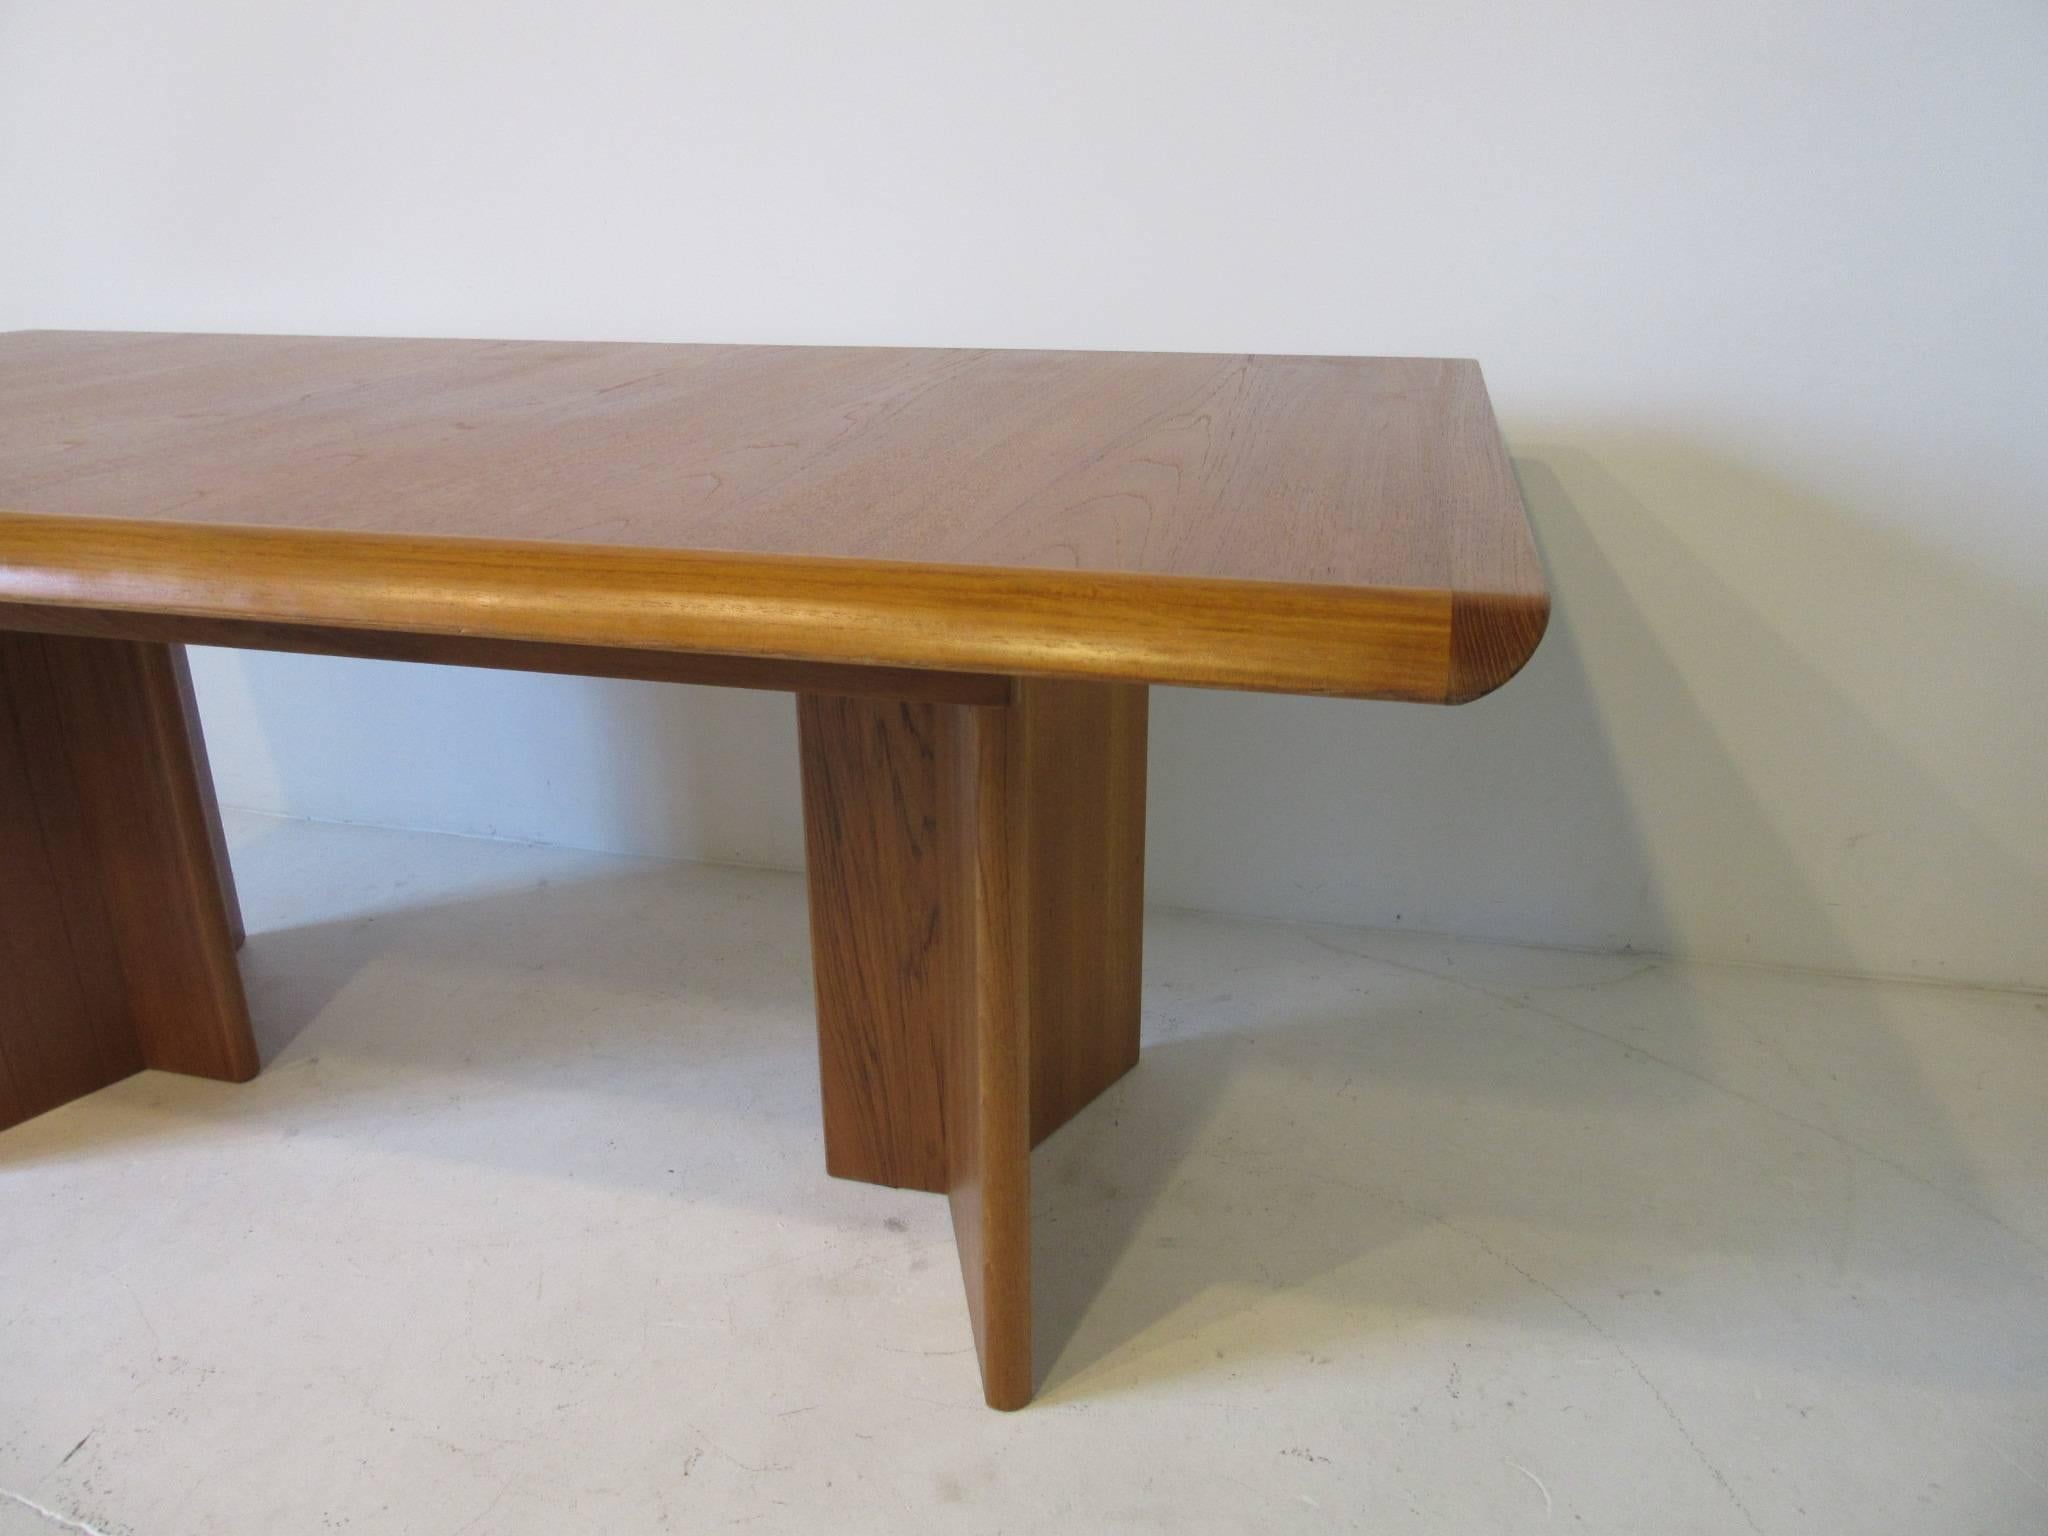 Canadian Teak Wood Danish Styled Dining or Conference Table